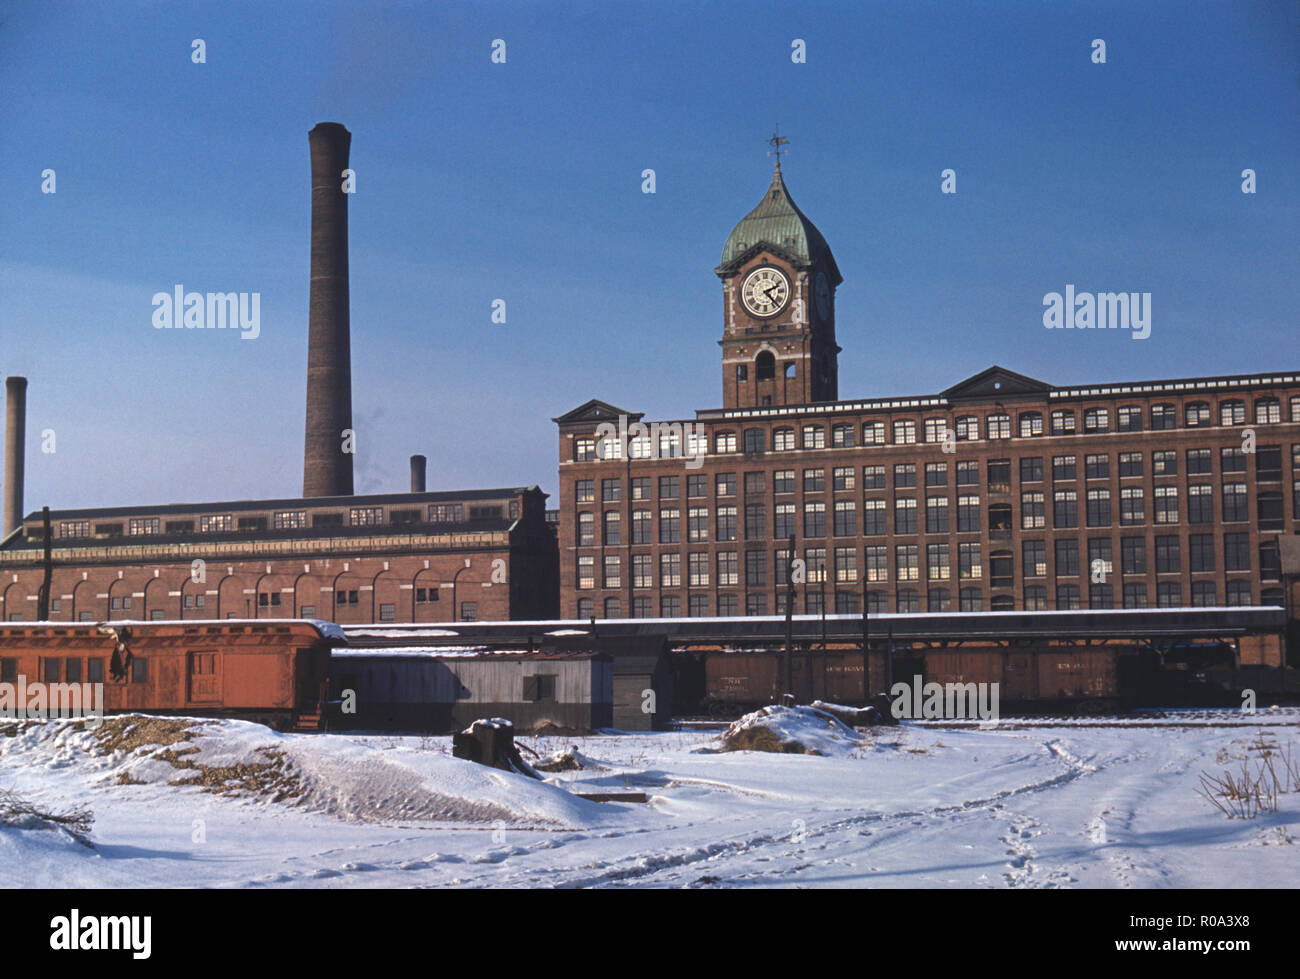 Railroad Cars and Factory Buildings, Lawrence, Massachusetts, USA, Jack Delano, Farm Security Administration, January 1941 Stock Photo